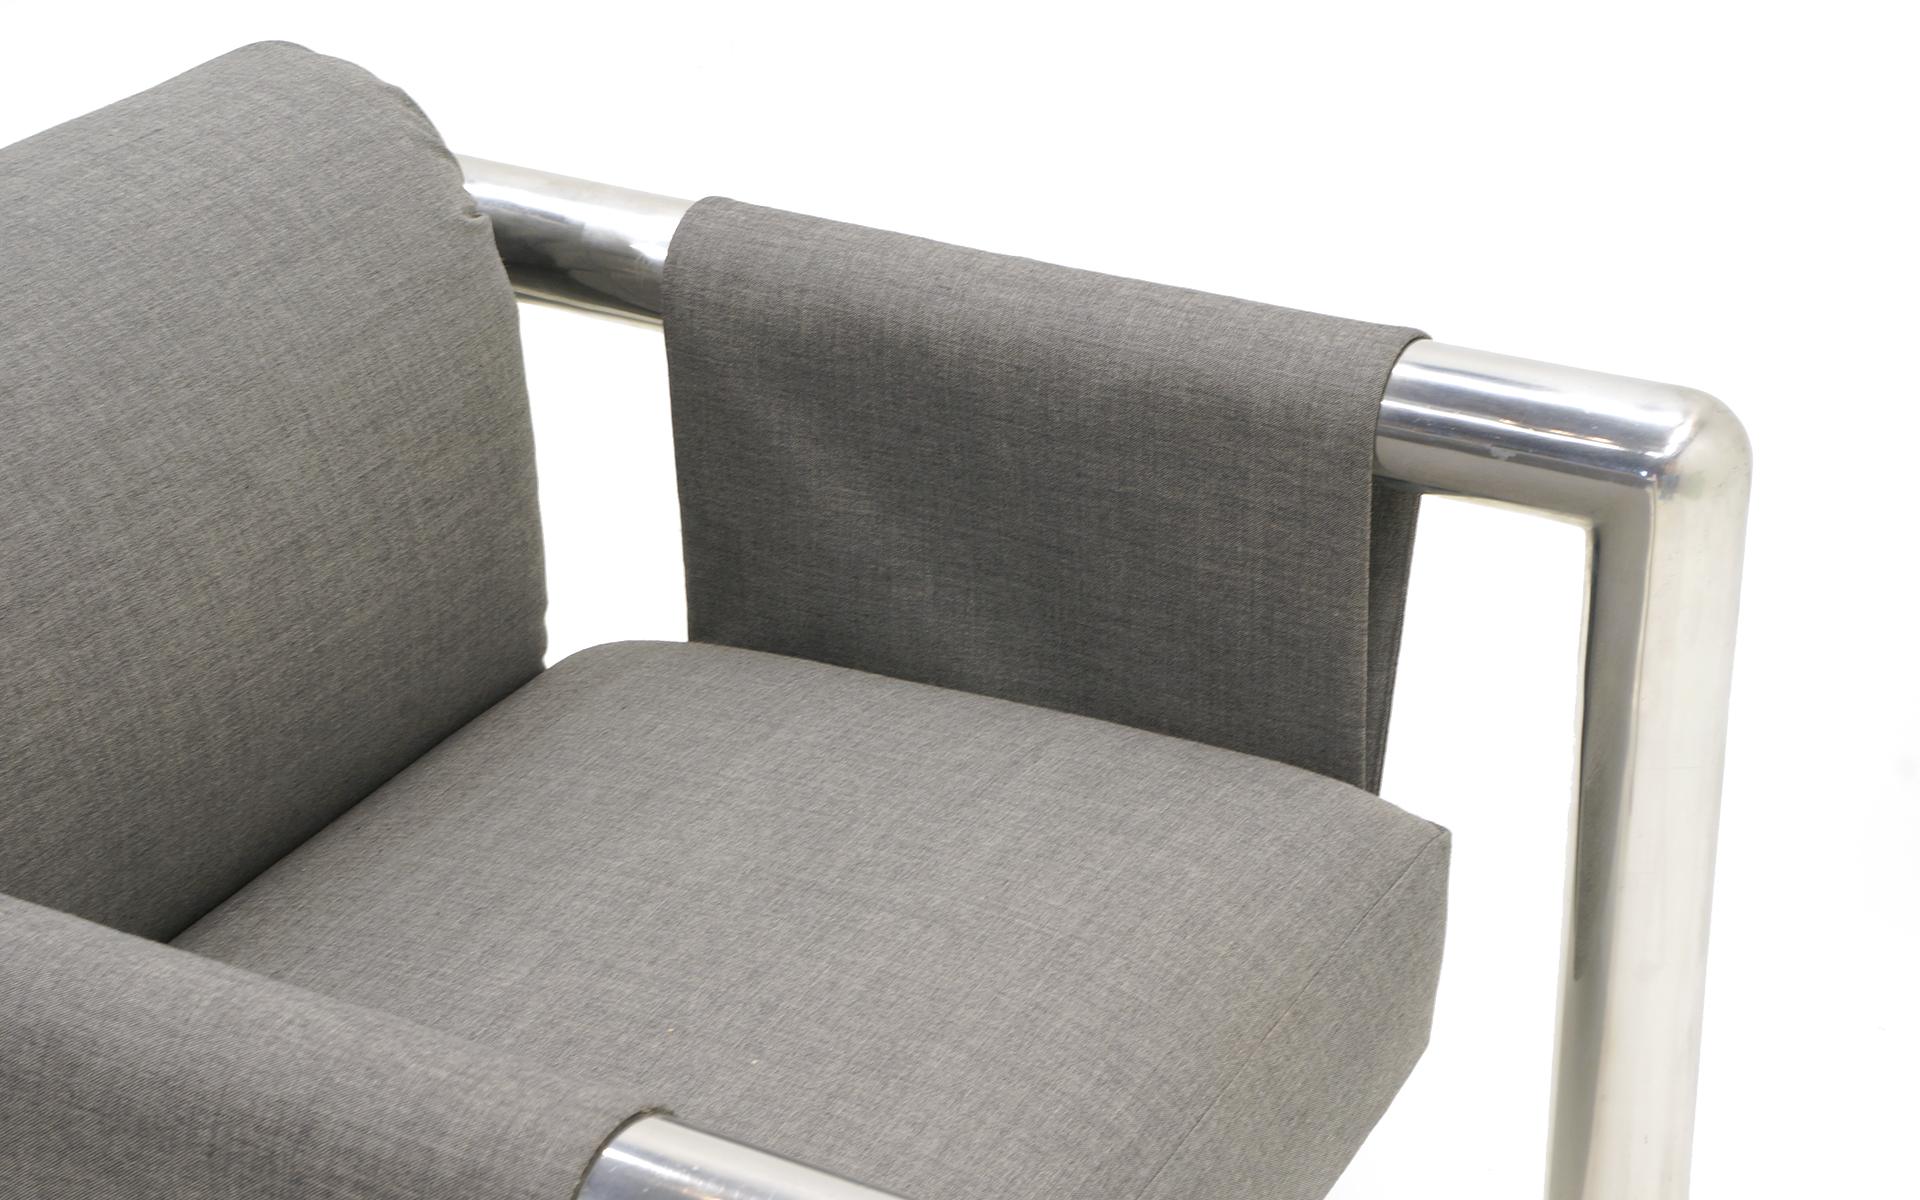 Pair of Lounge Chairs with Arms by John Mascheroni, New Maharam Upholstery 2